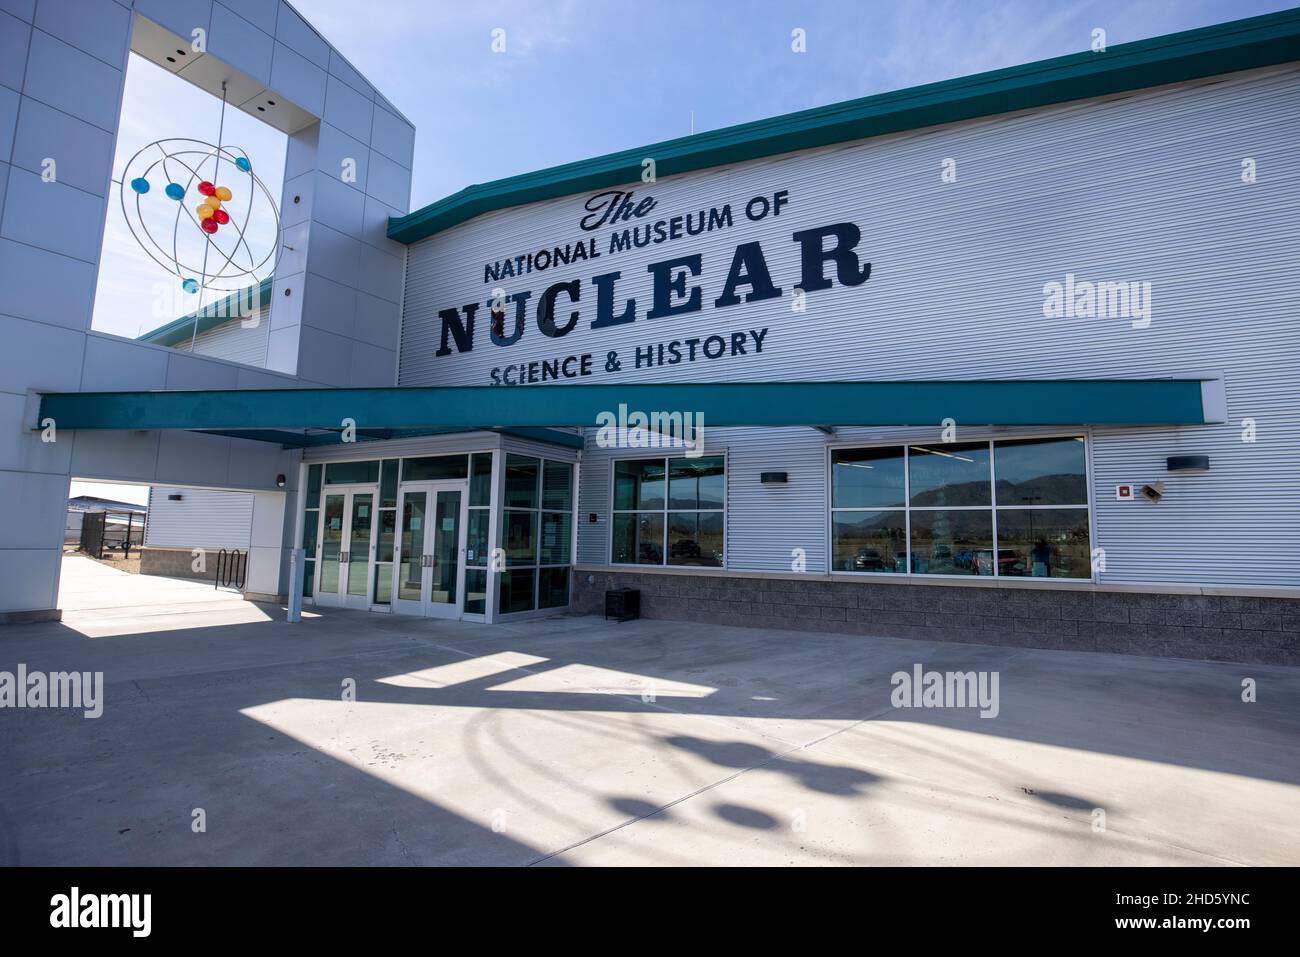 National Museum of Nuclear Science & History in Albuquerque, New Mexico. Früher als National Atomic Museum bezeichnet. Stockfoto